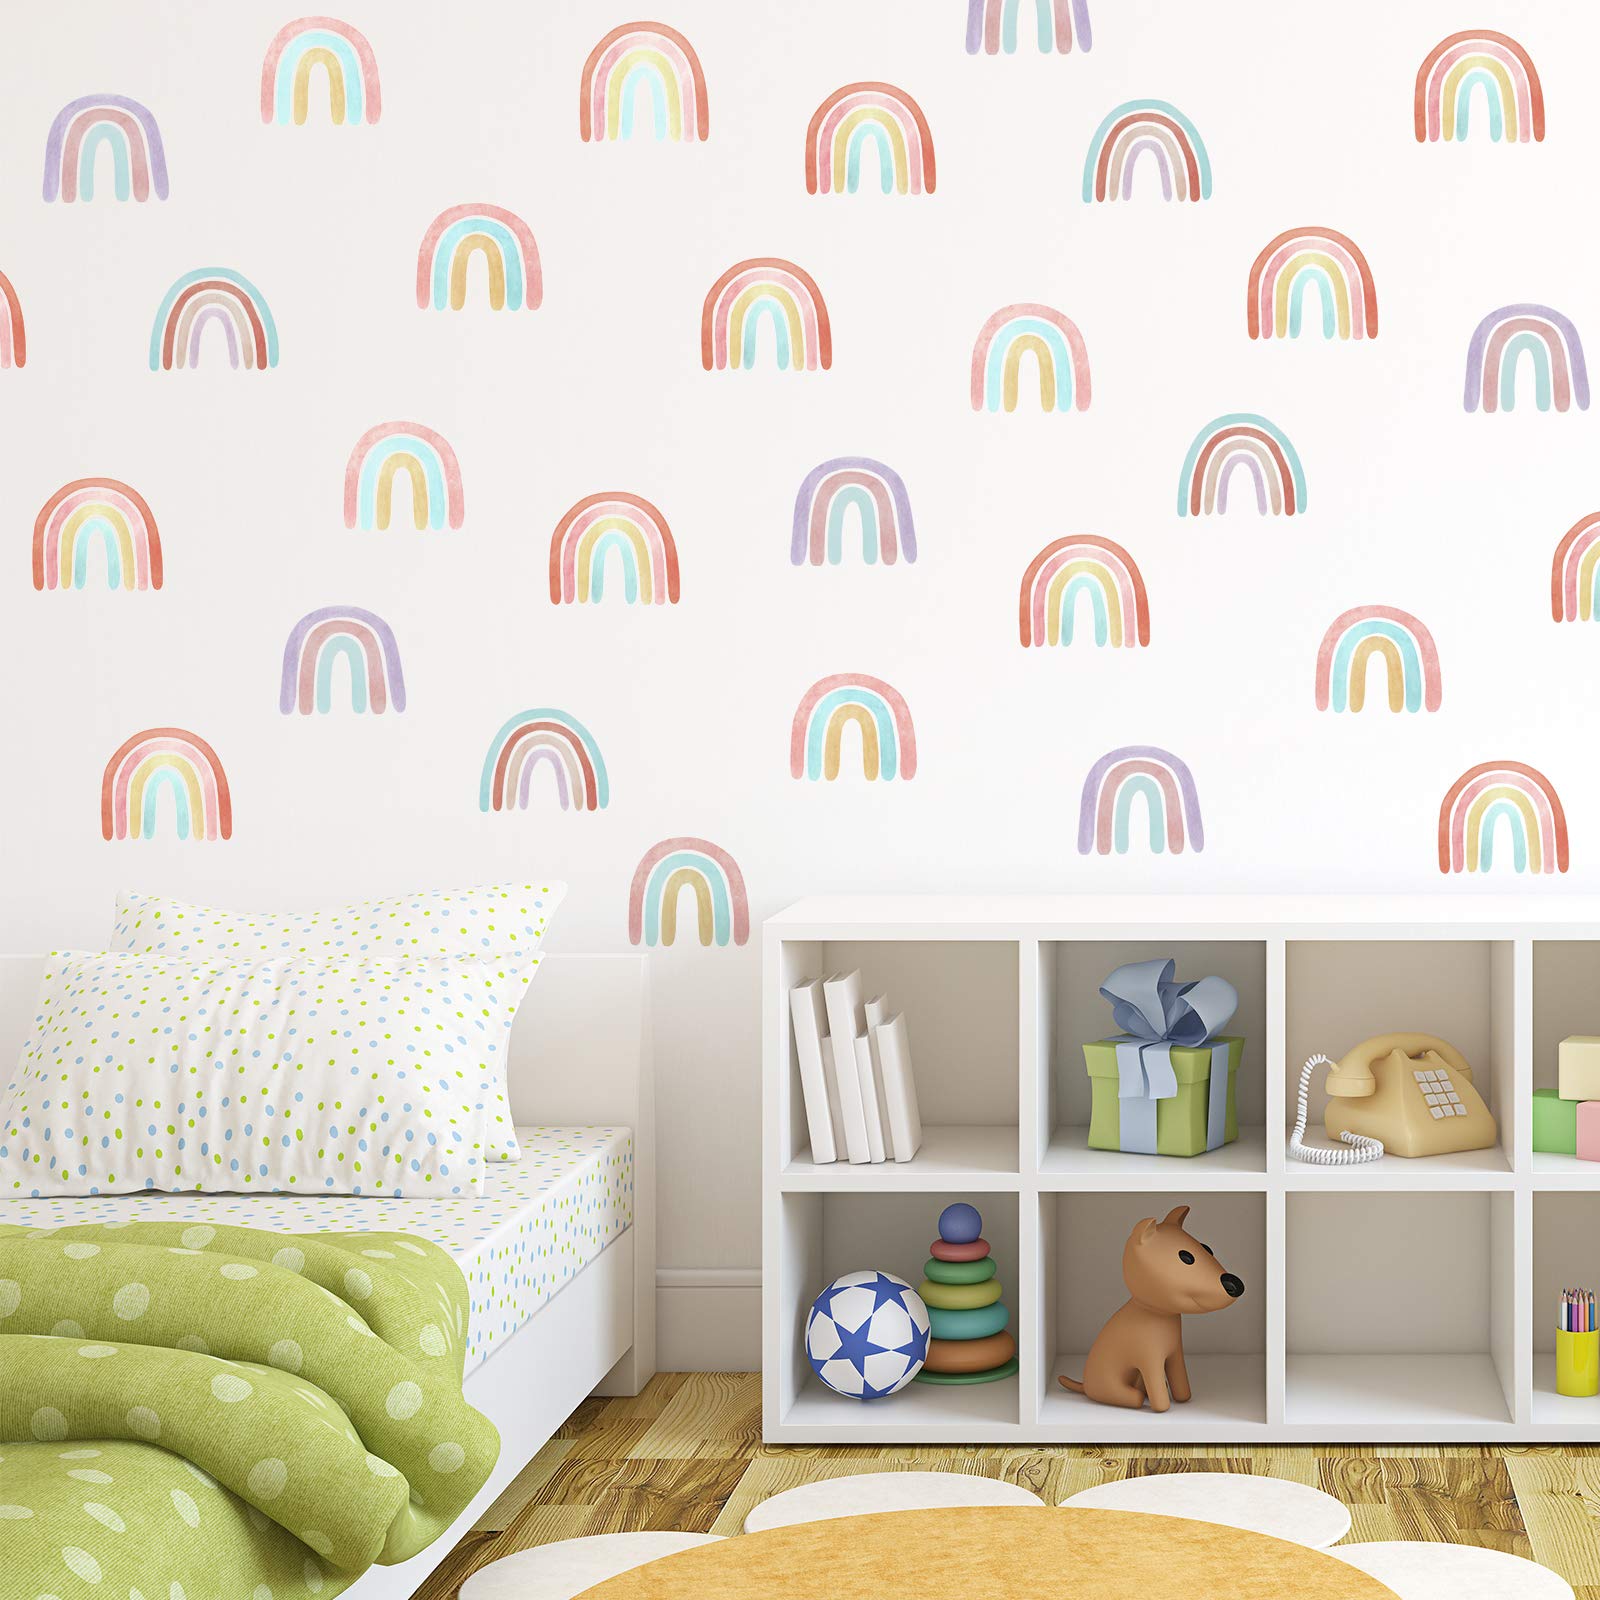 72 Pieces Colorful Boho Rainbow Wall Decals Stick and Peel Removable Vinyl Waterproof Rainbow Wall Stickers for Girls Kids Nursery Bedroom Decorations